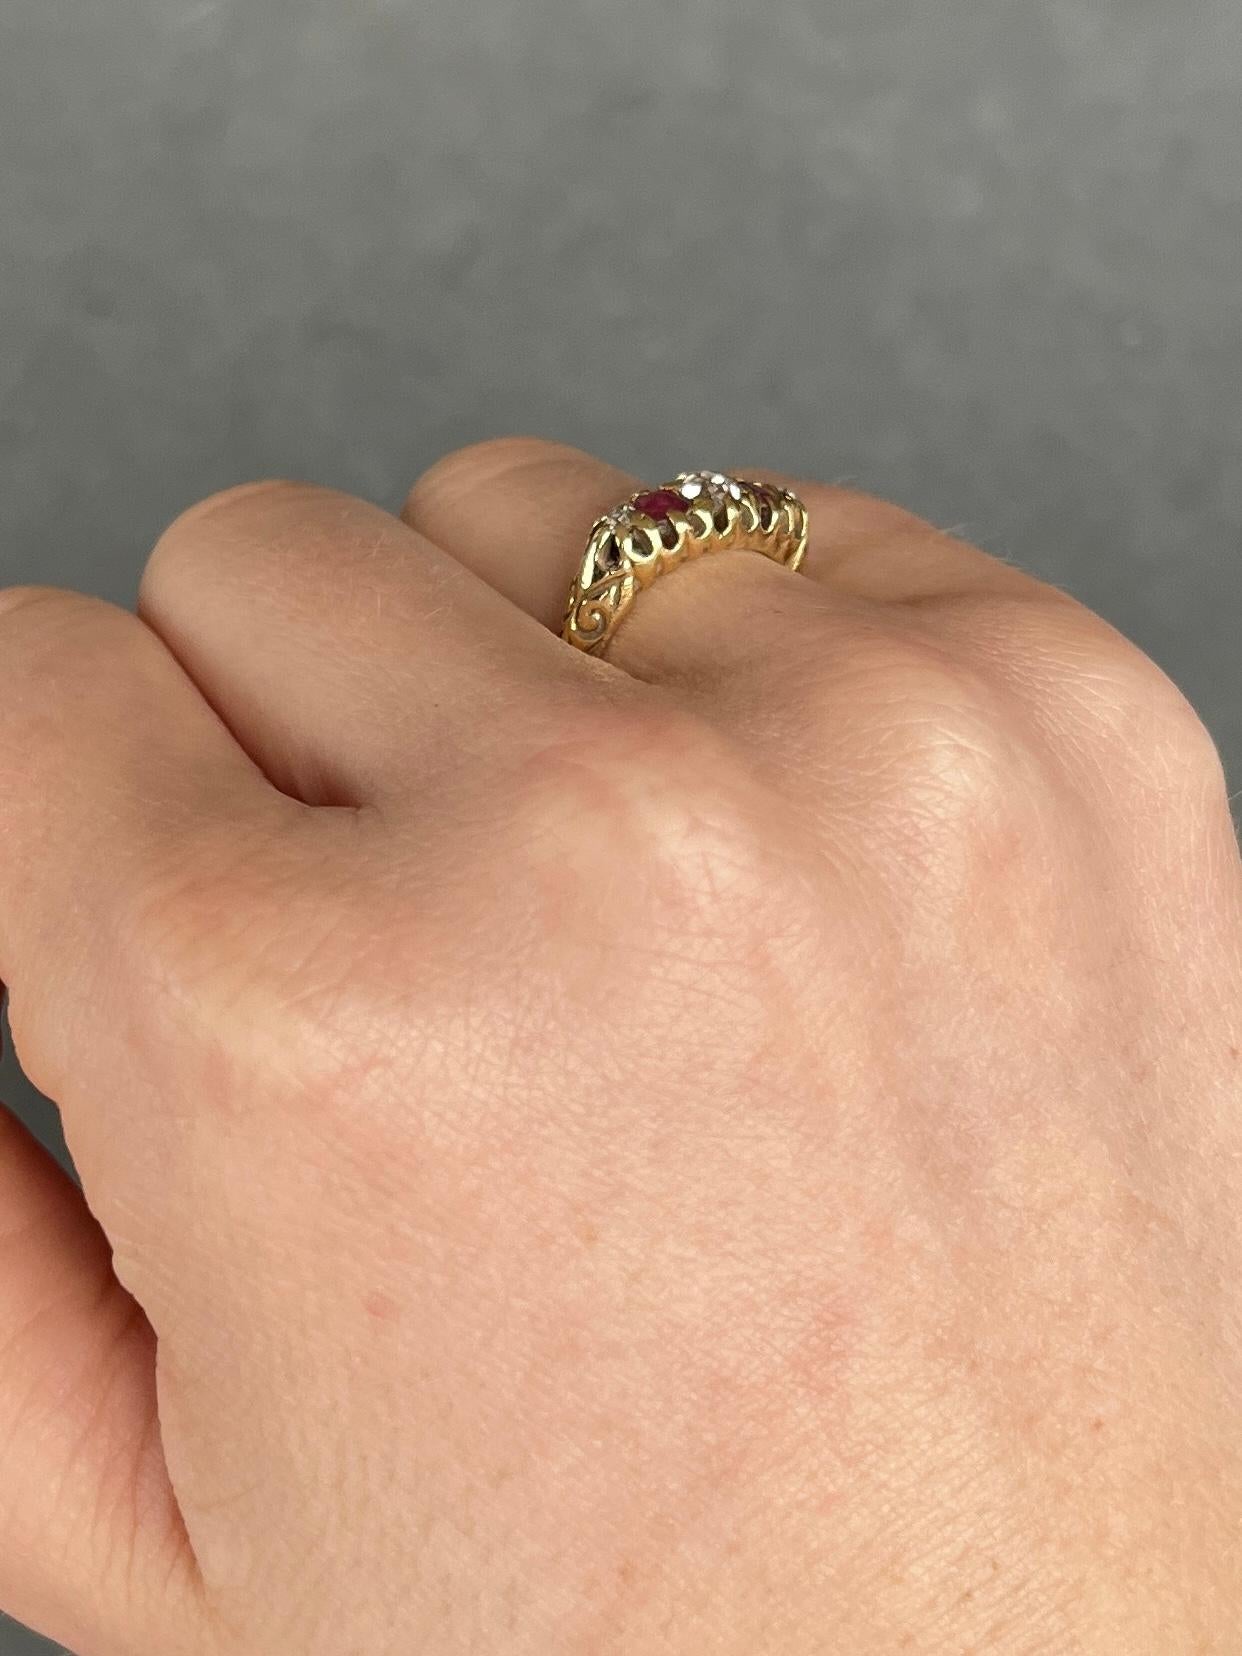 Set in this glossy 18ct gold ring are three Diamonds and two Rubies. The three diamonds total 30pts and the rubies total 30pts. The stones are set in simple claw settings and the shoulders have engraved detail. Hallmarked London 1903.

Ring Size: J